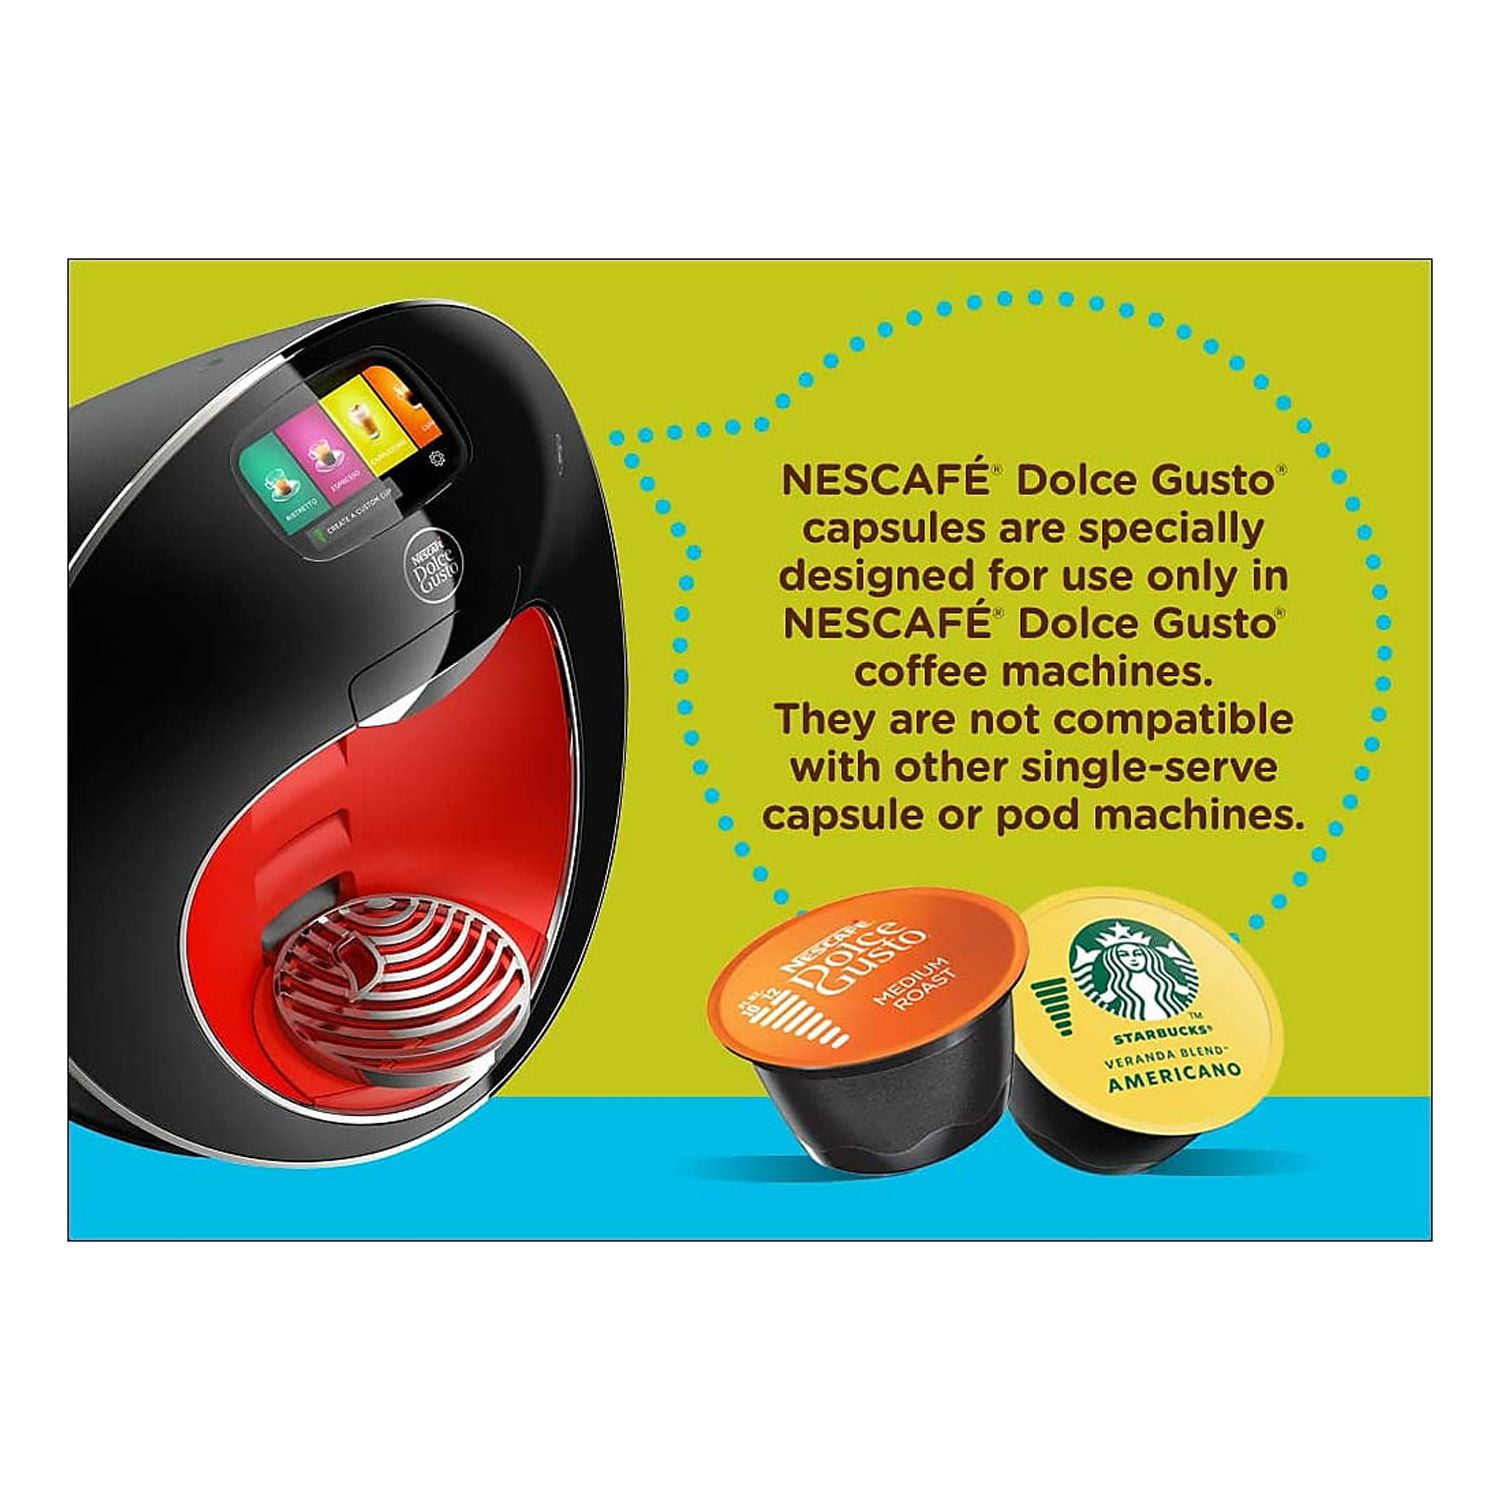 108 Capsules House Blend Americano Starbucks by Nescafé Dolce Gusto  American Long Coffee